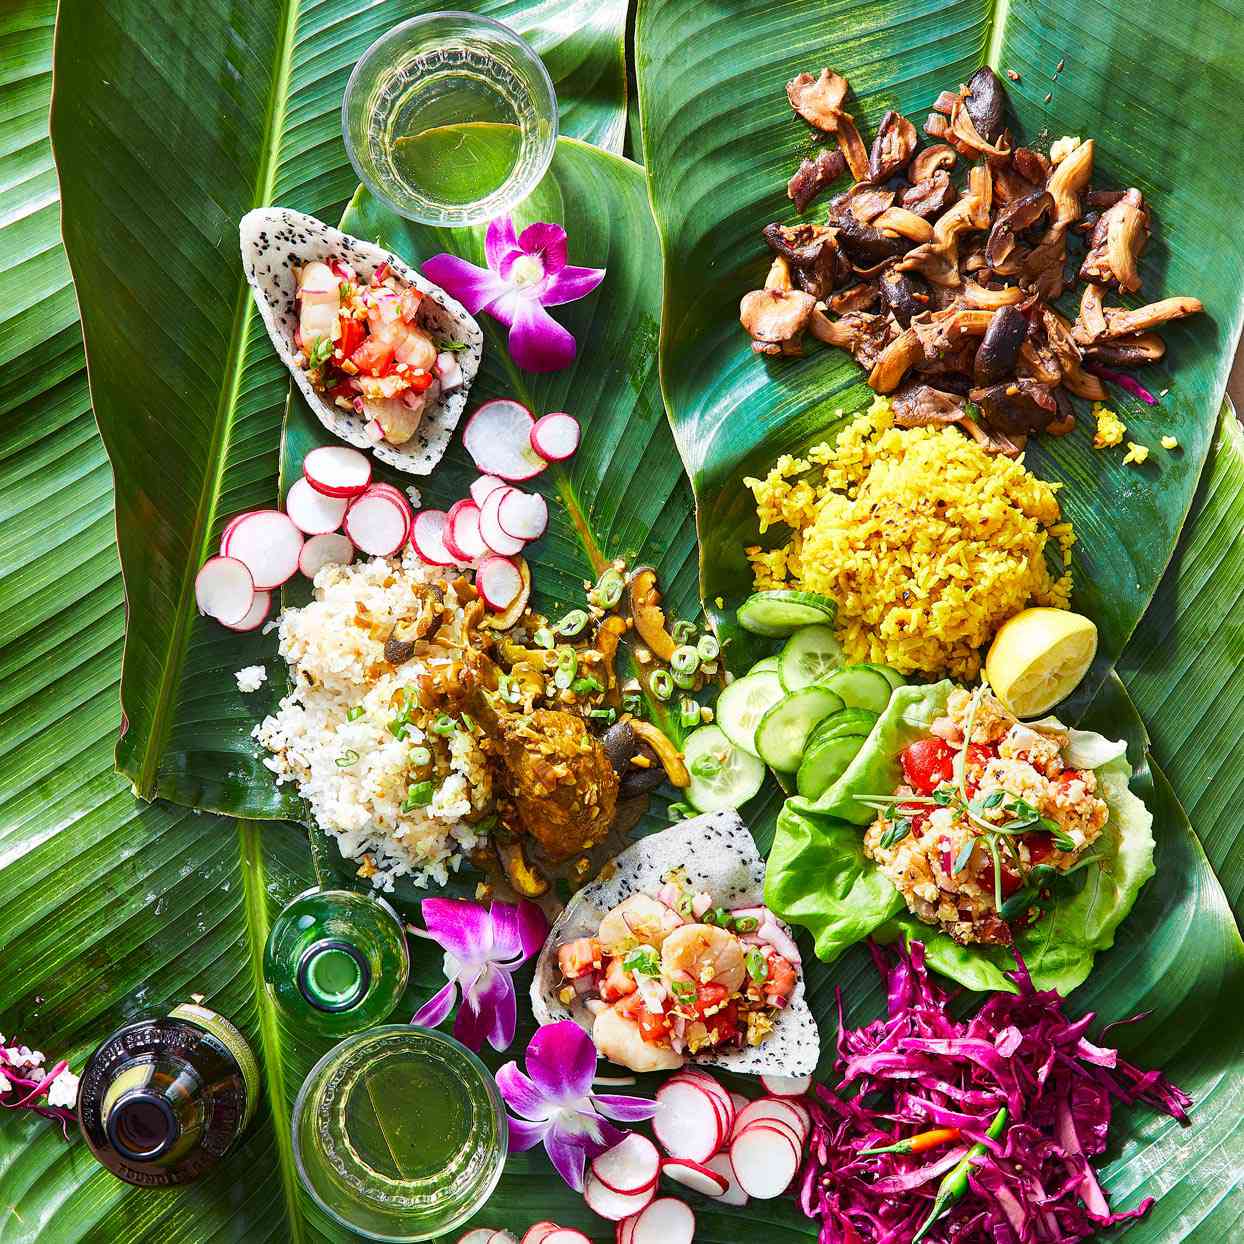 Recipes For A Filipino Kamayan Feast Allrecipes A special dinner where food is laid out onto banana. recipes for a filipino kamayan feast allrecipes